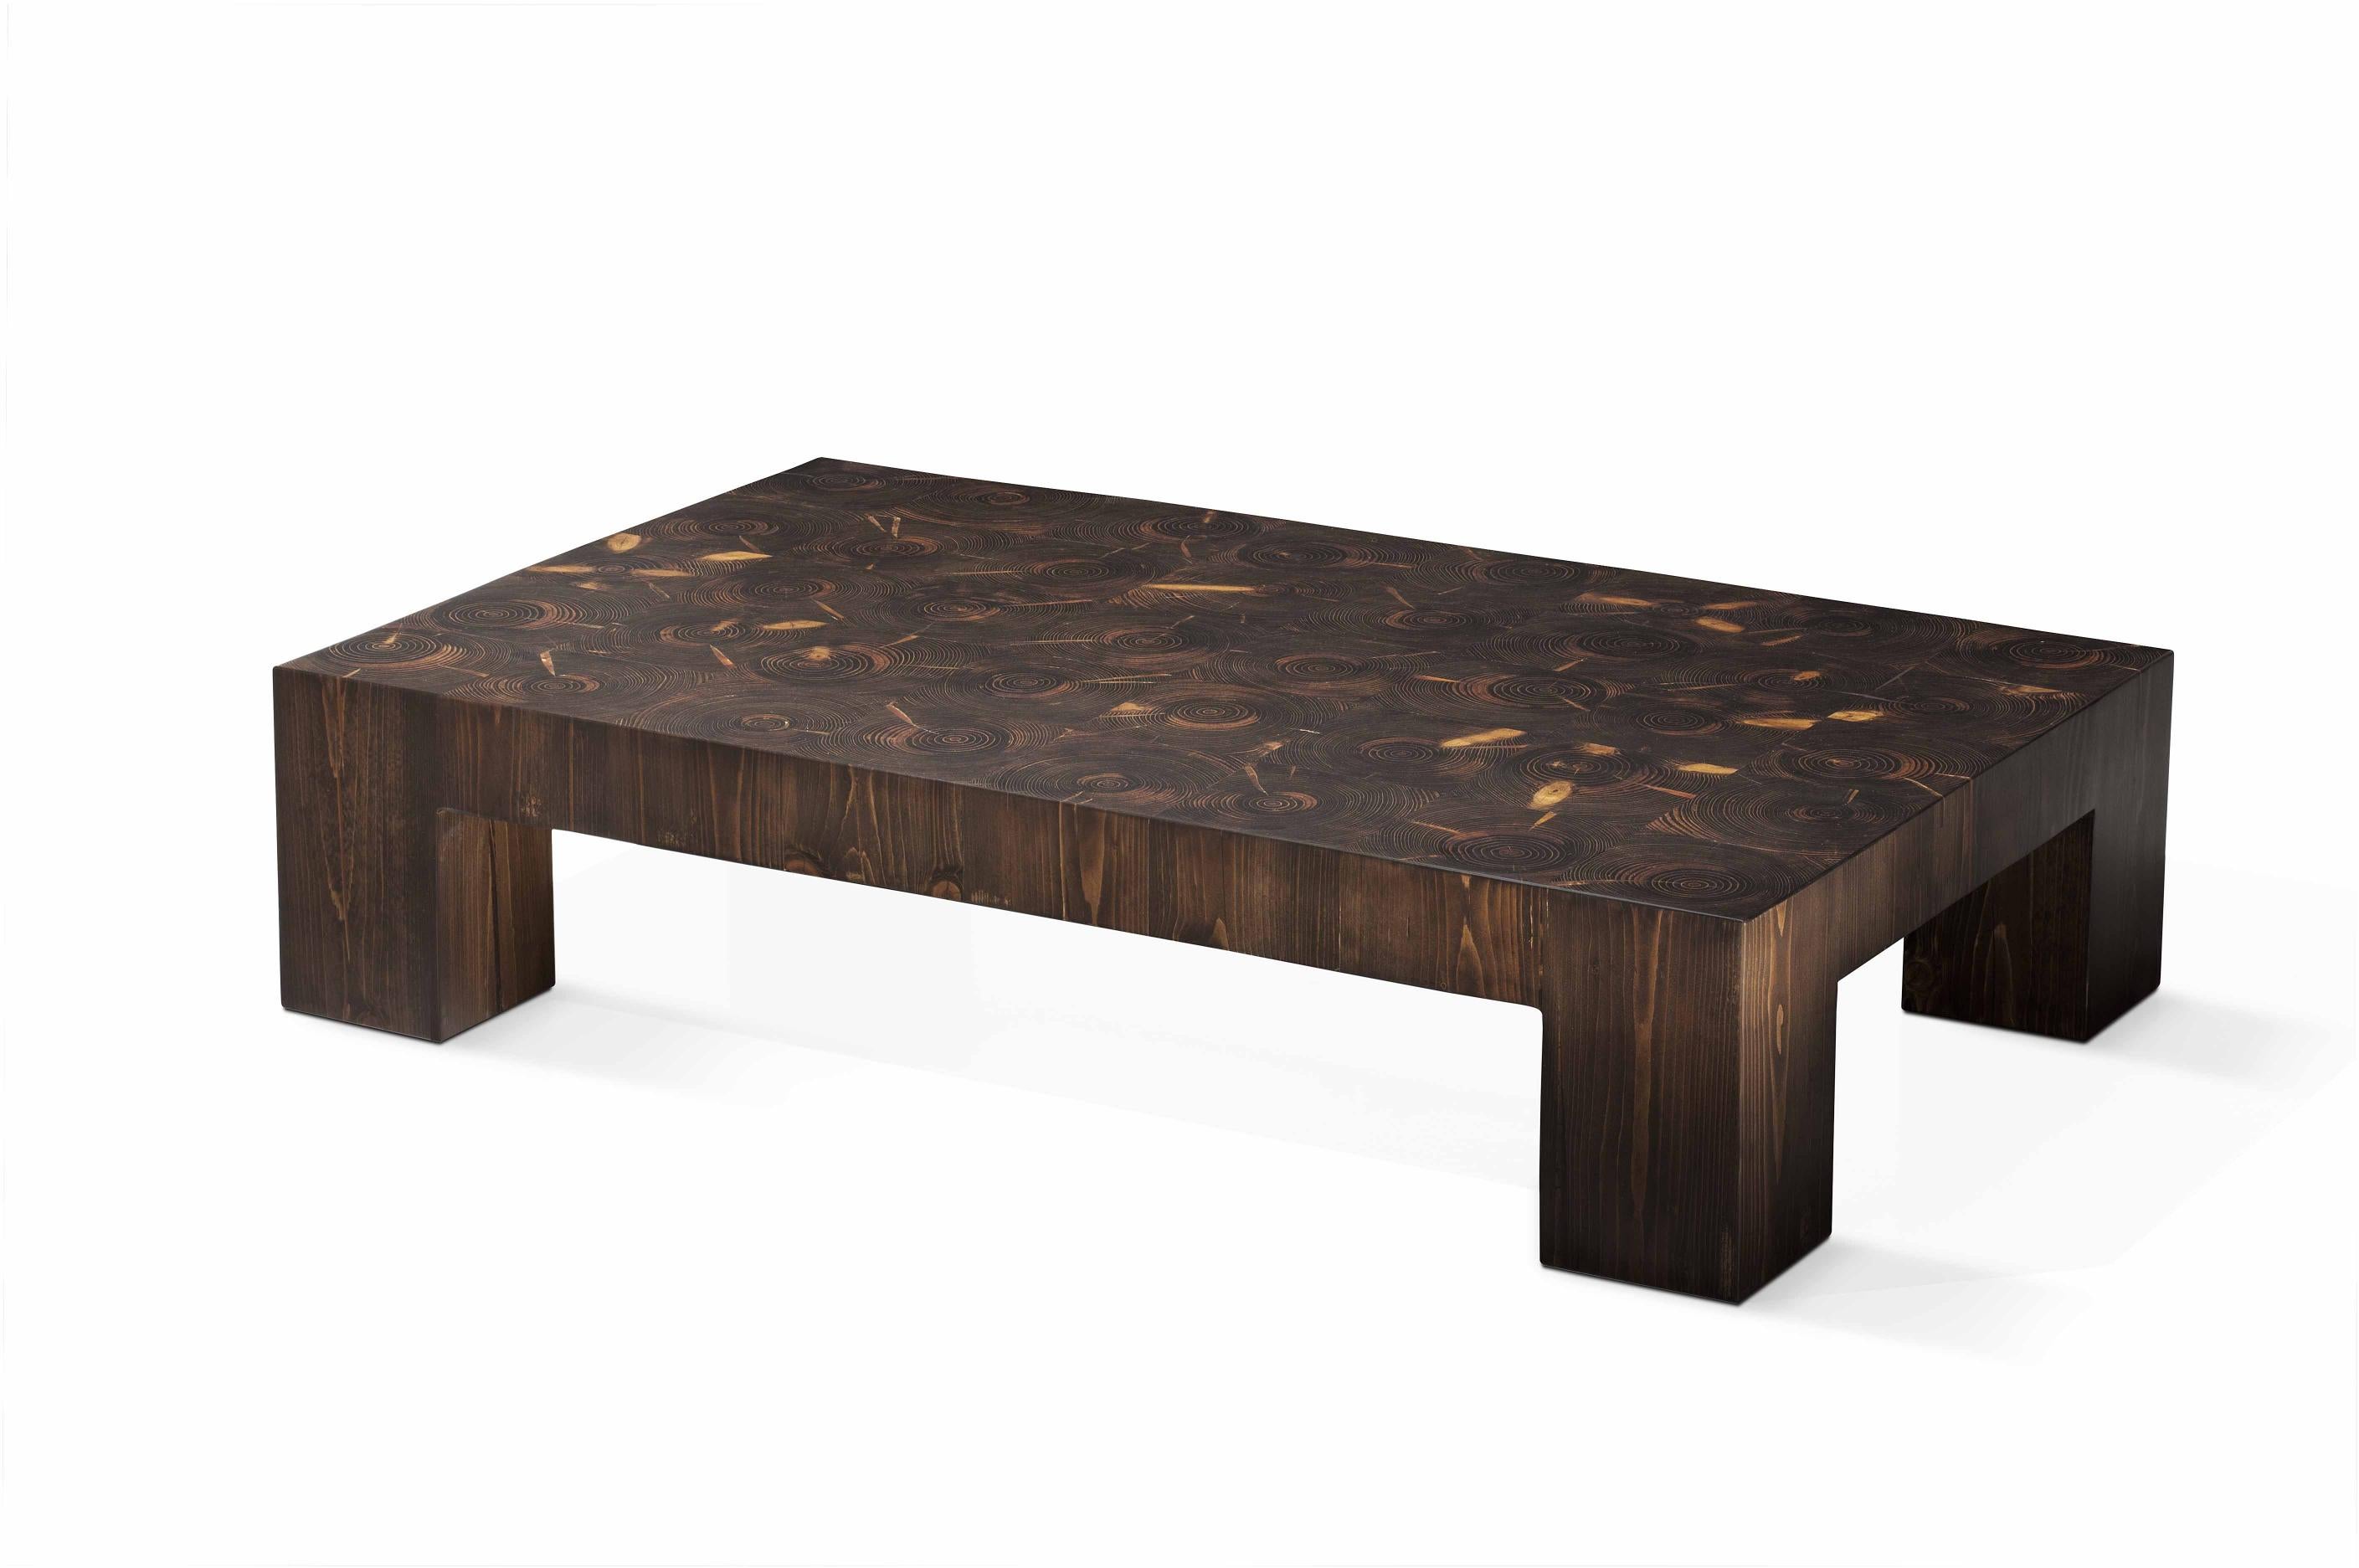 Across The Universe Coffee Table by Francesco Profili
Dimensions: W 120 x D 75 x H 27 cm 
Materials: Solid Wood, Resin.

The elegance of a simple form, the natural richness of the wood, the magic of light.
The table conveys and unique atmosphere,